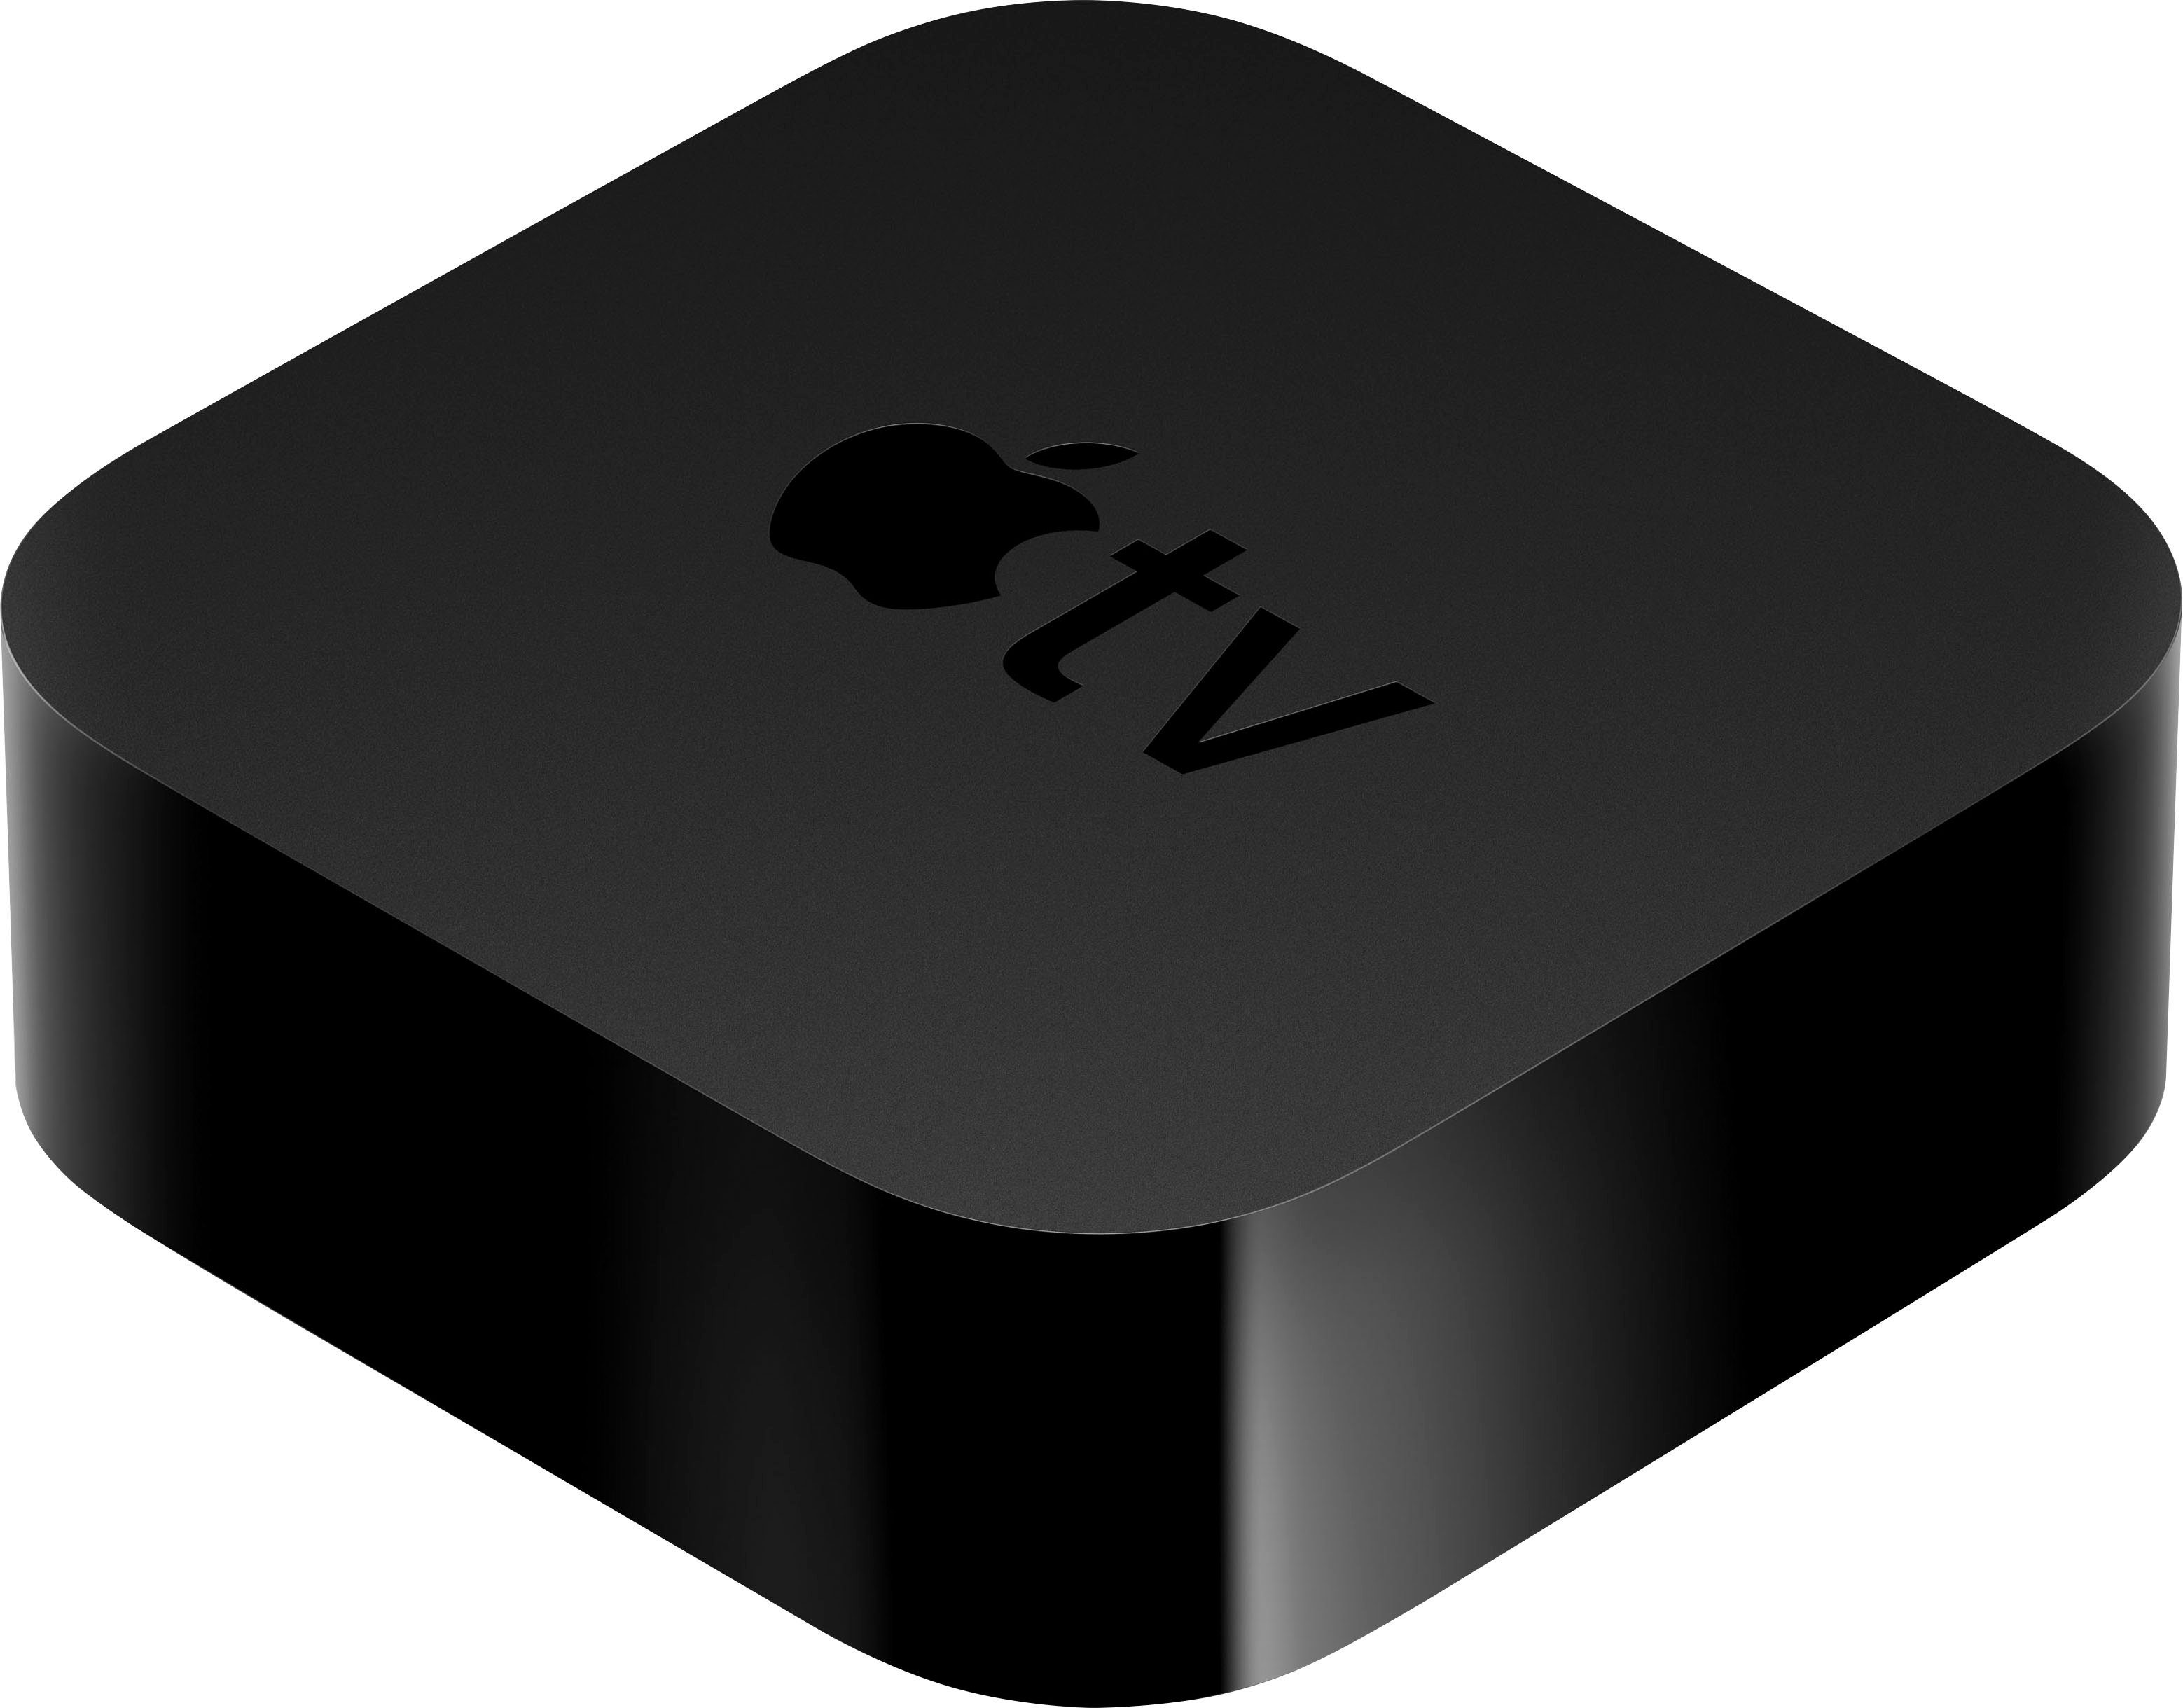 Apple TV 4K (2021) review: An uncompromising streaming box